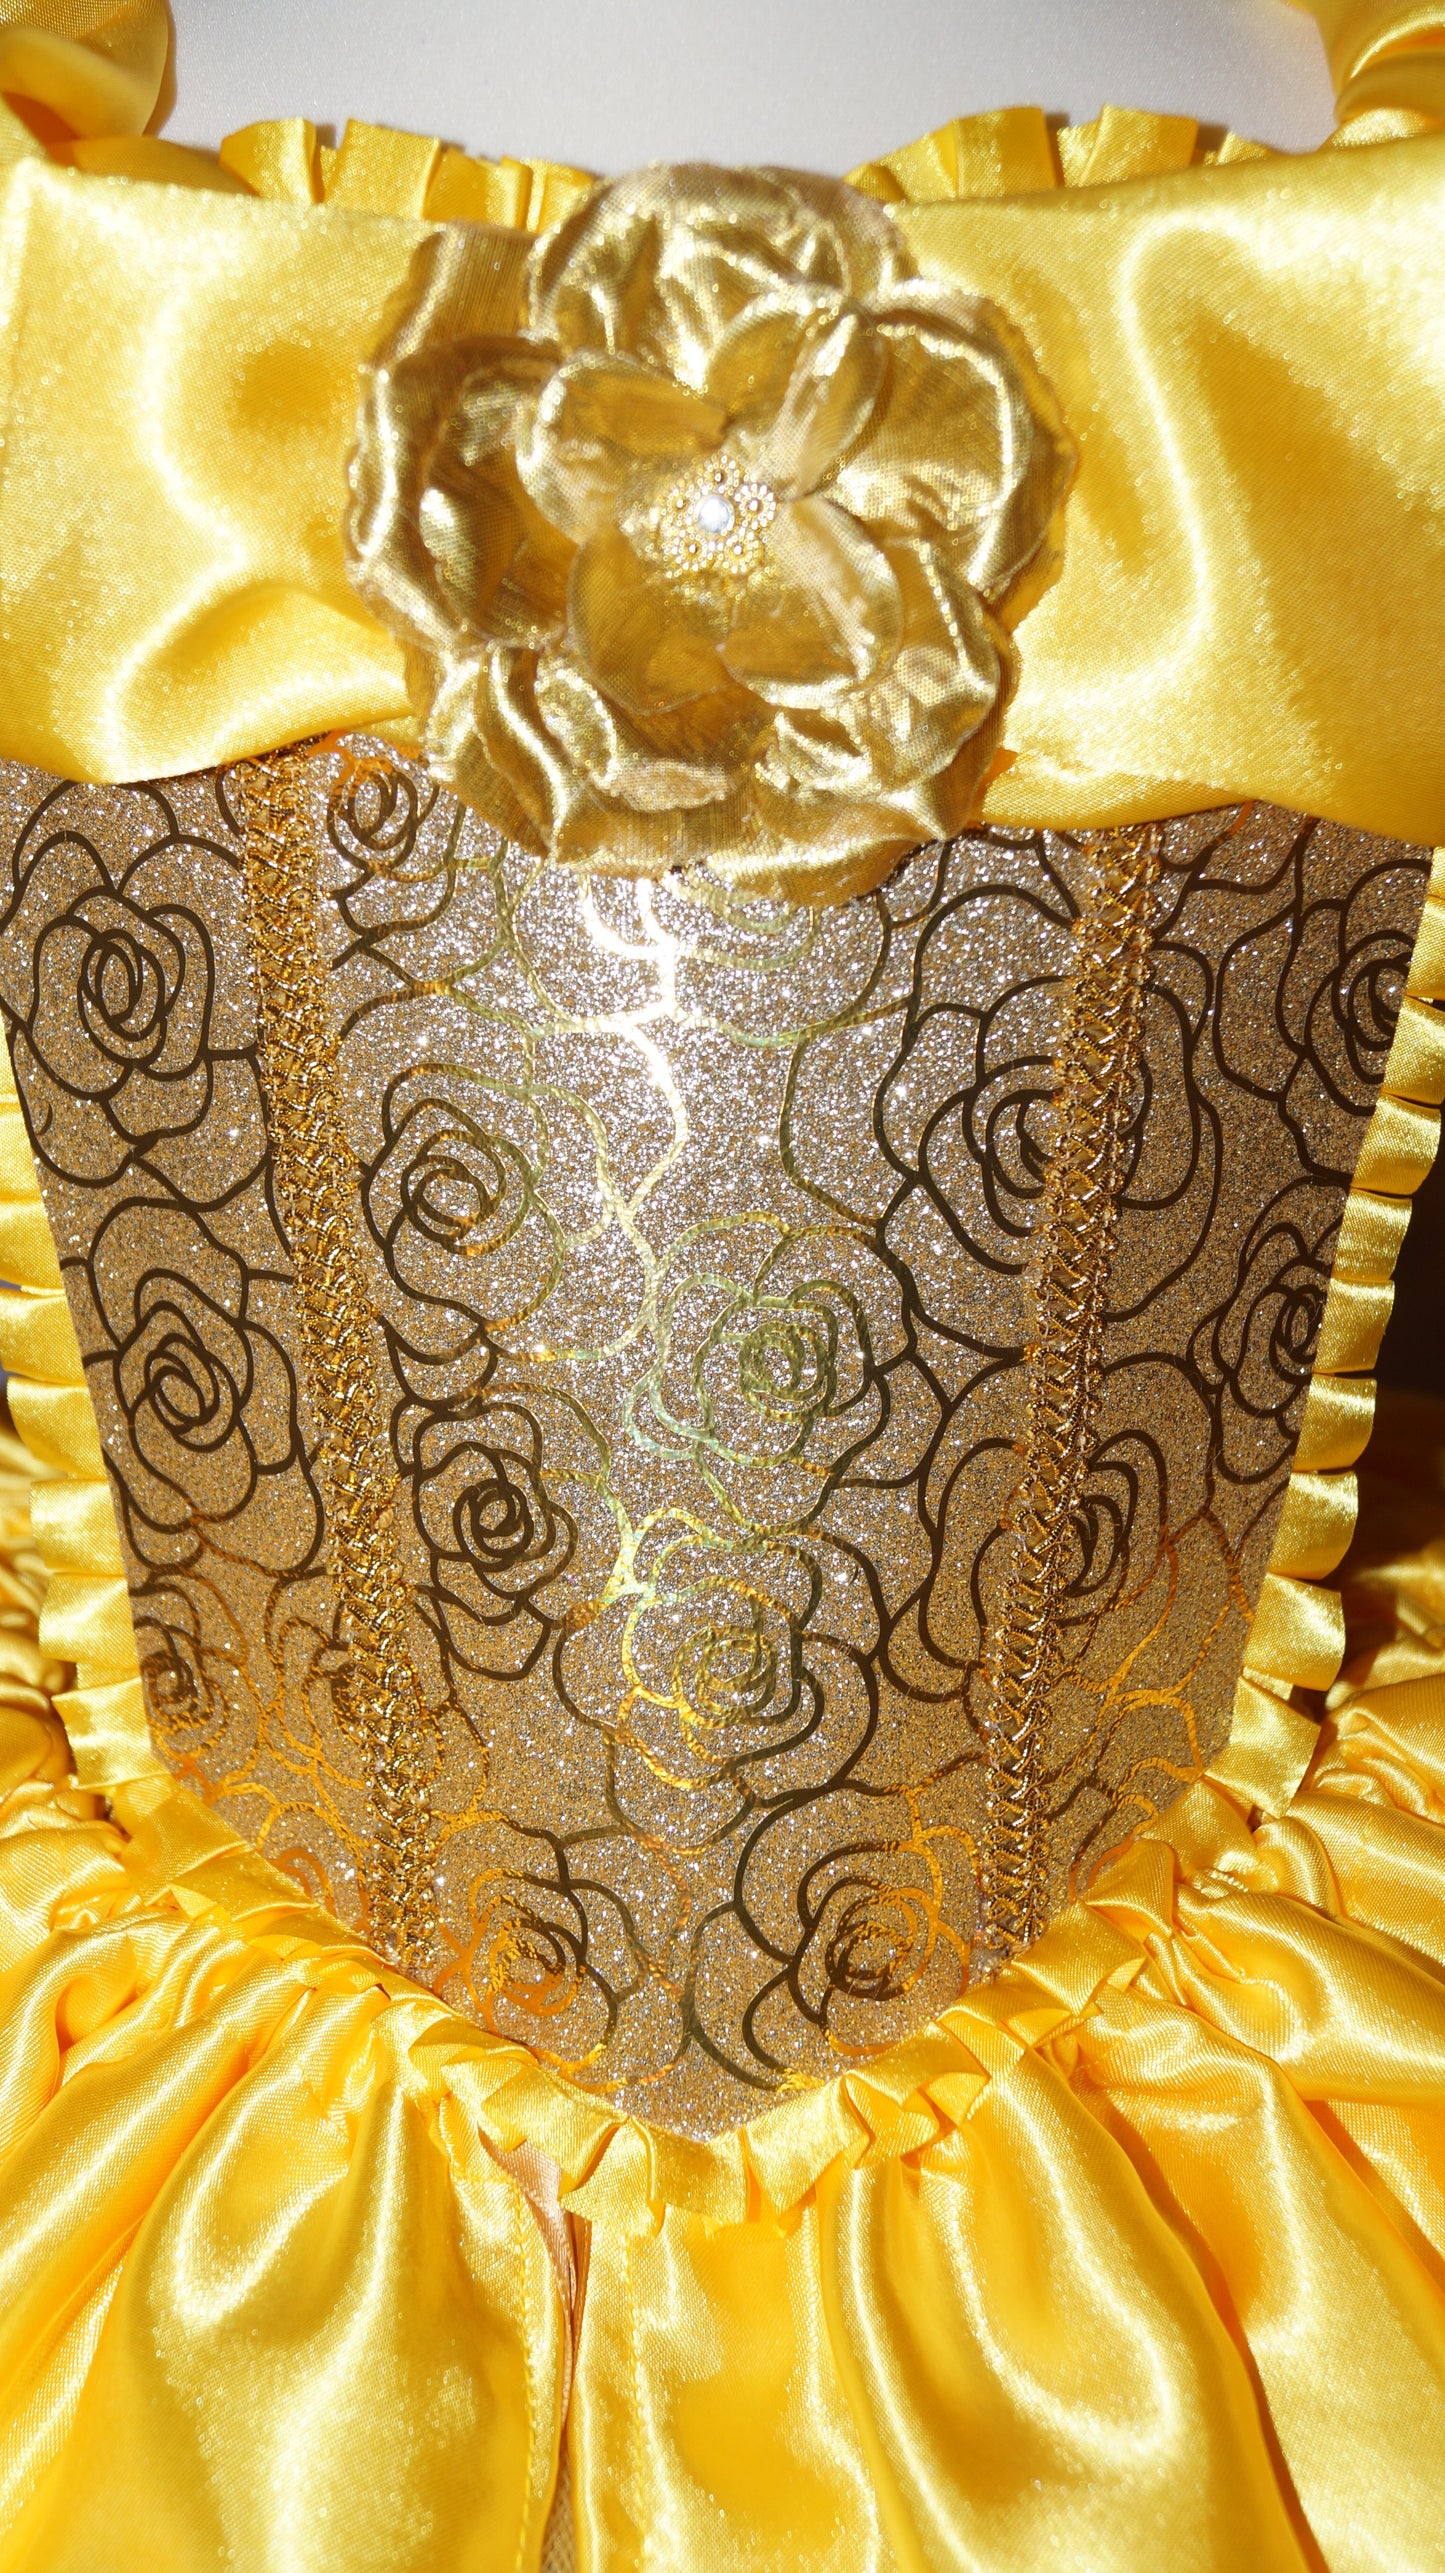 Disney Princess Deluxe Belle Beauty and the Beast Gold Rose Tutu Dress